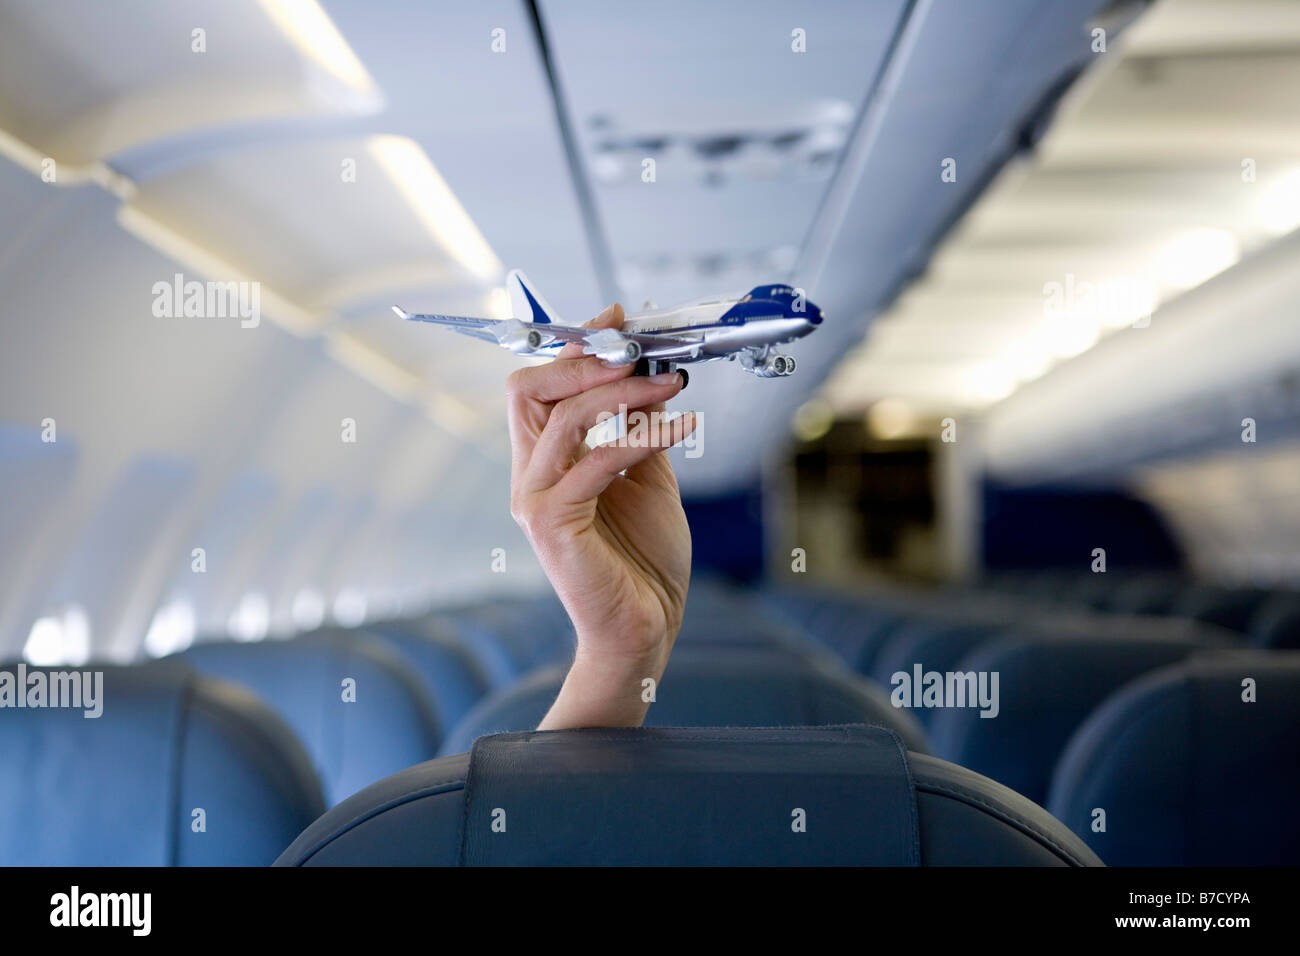 A hand holding a toy airplane above an airplane seat Stock Photo